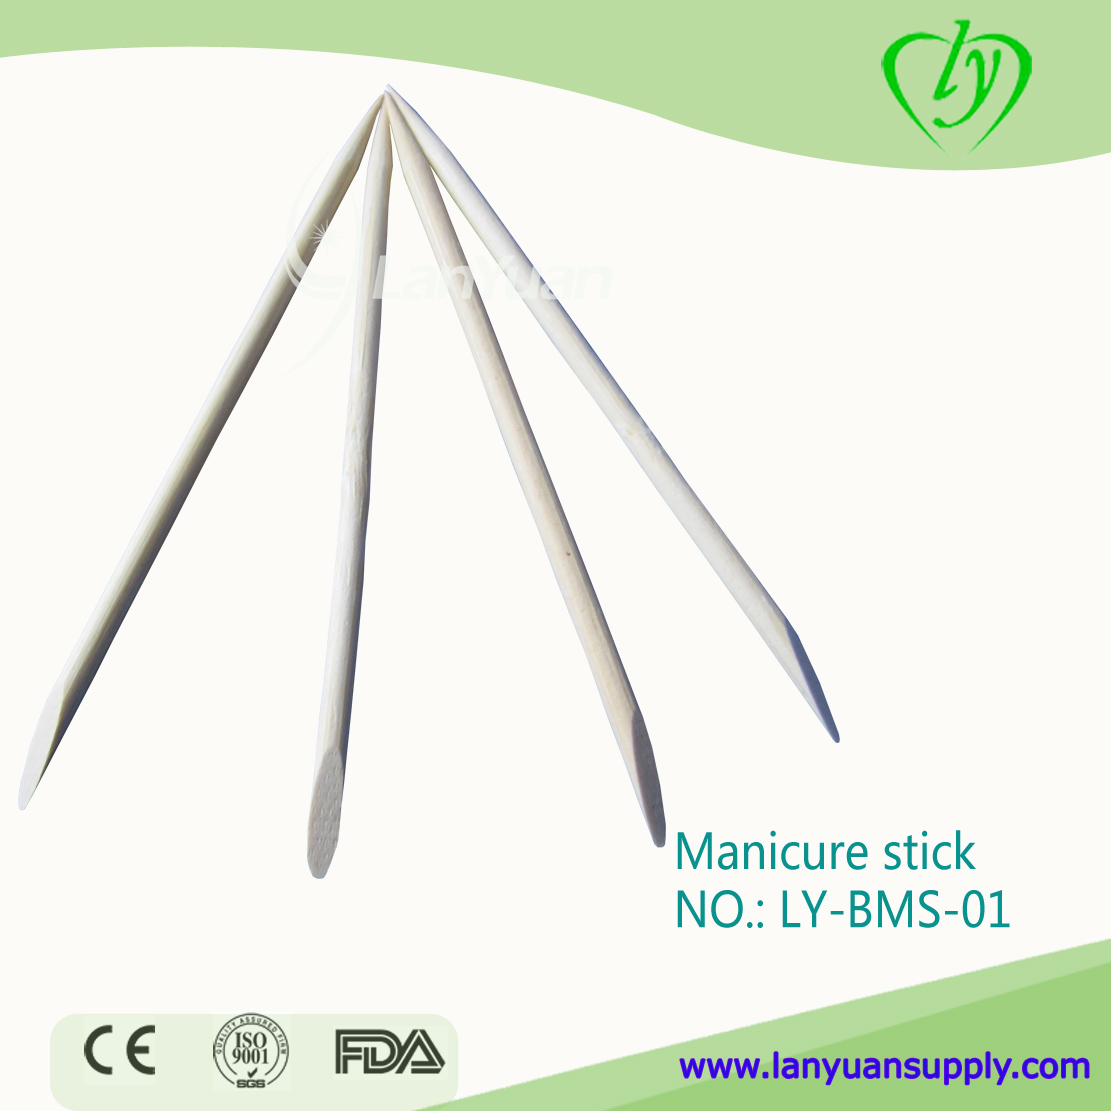 Disposable Bamboo Manicure Stick for Nai Care